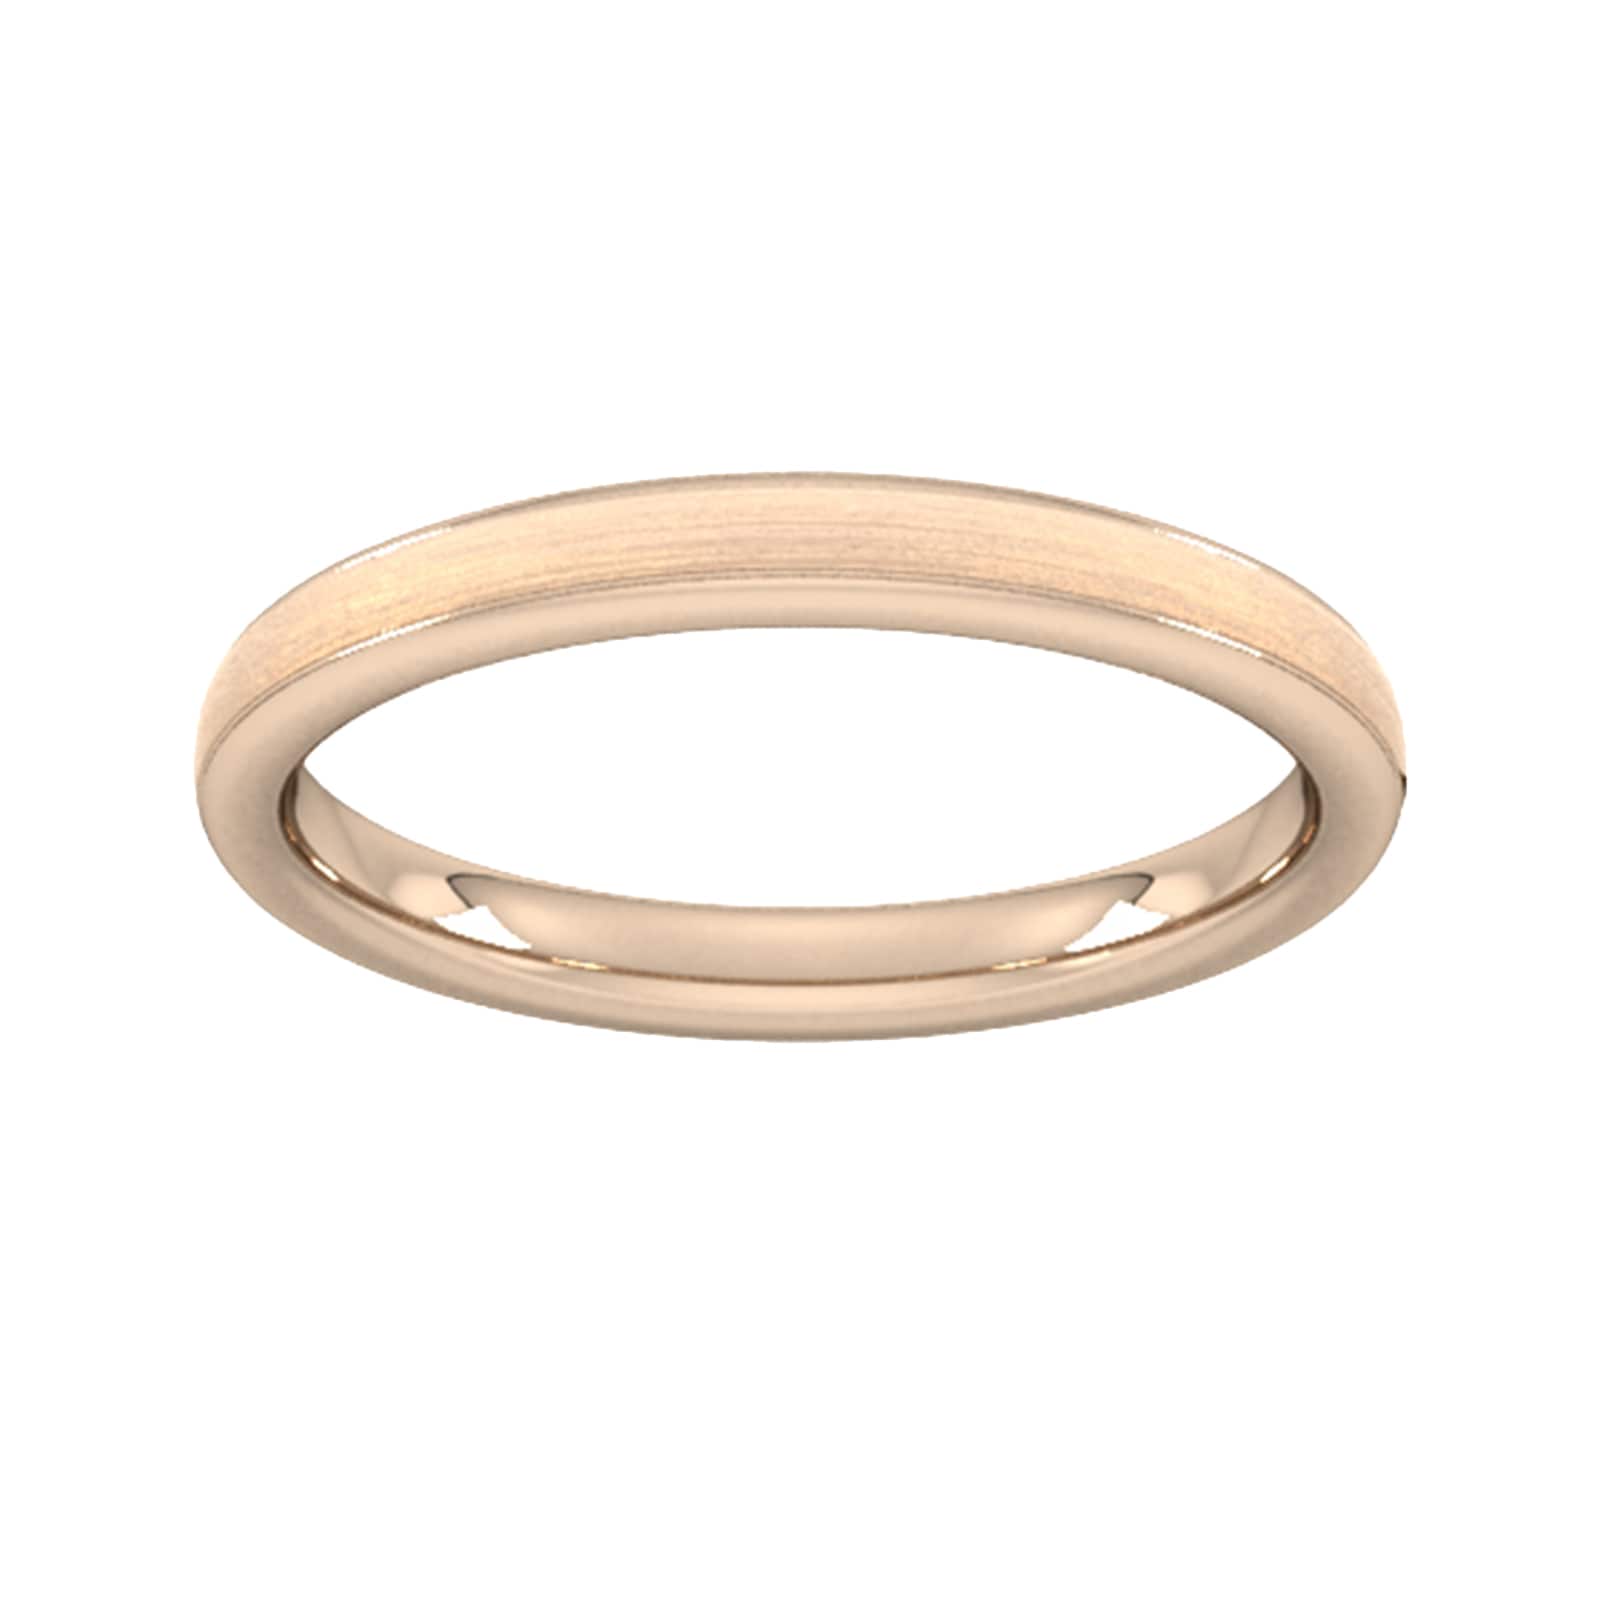 2.5mm Traditional Court Heavy Matt Centre With Grooves Wedding Ring In 9 Carat Rose Gold - Ring Size P